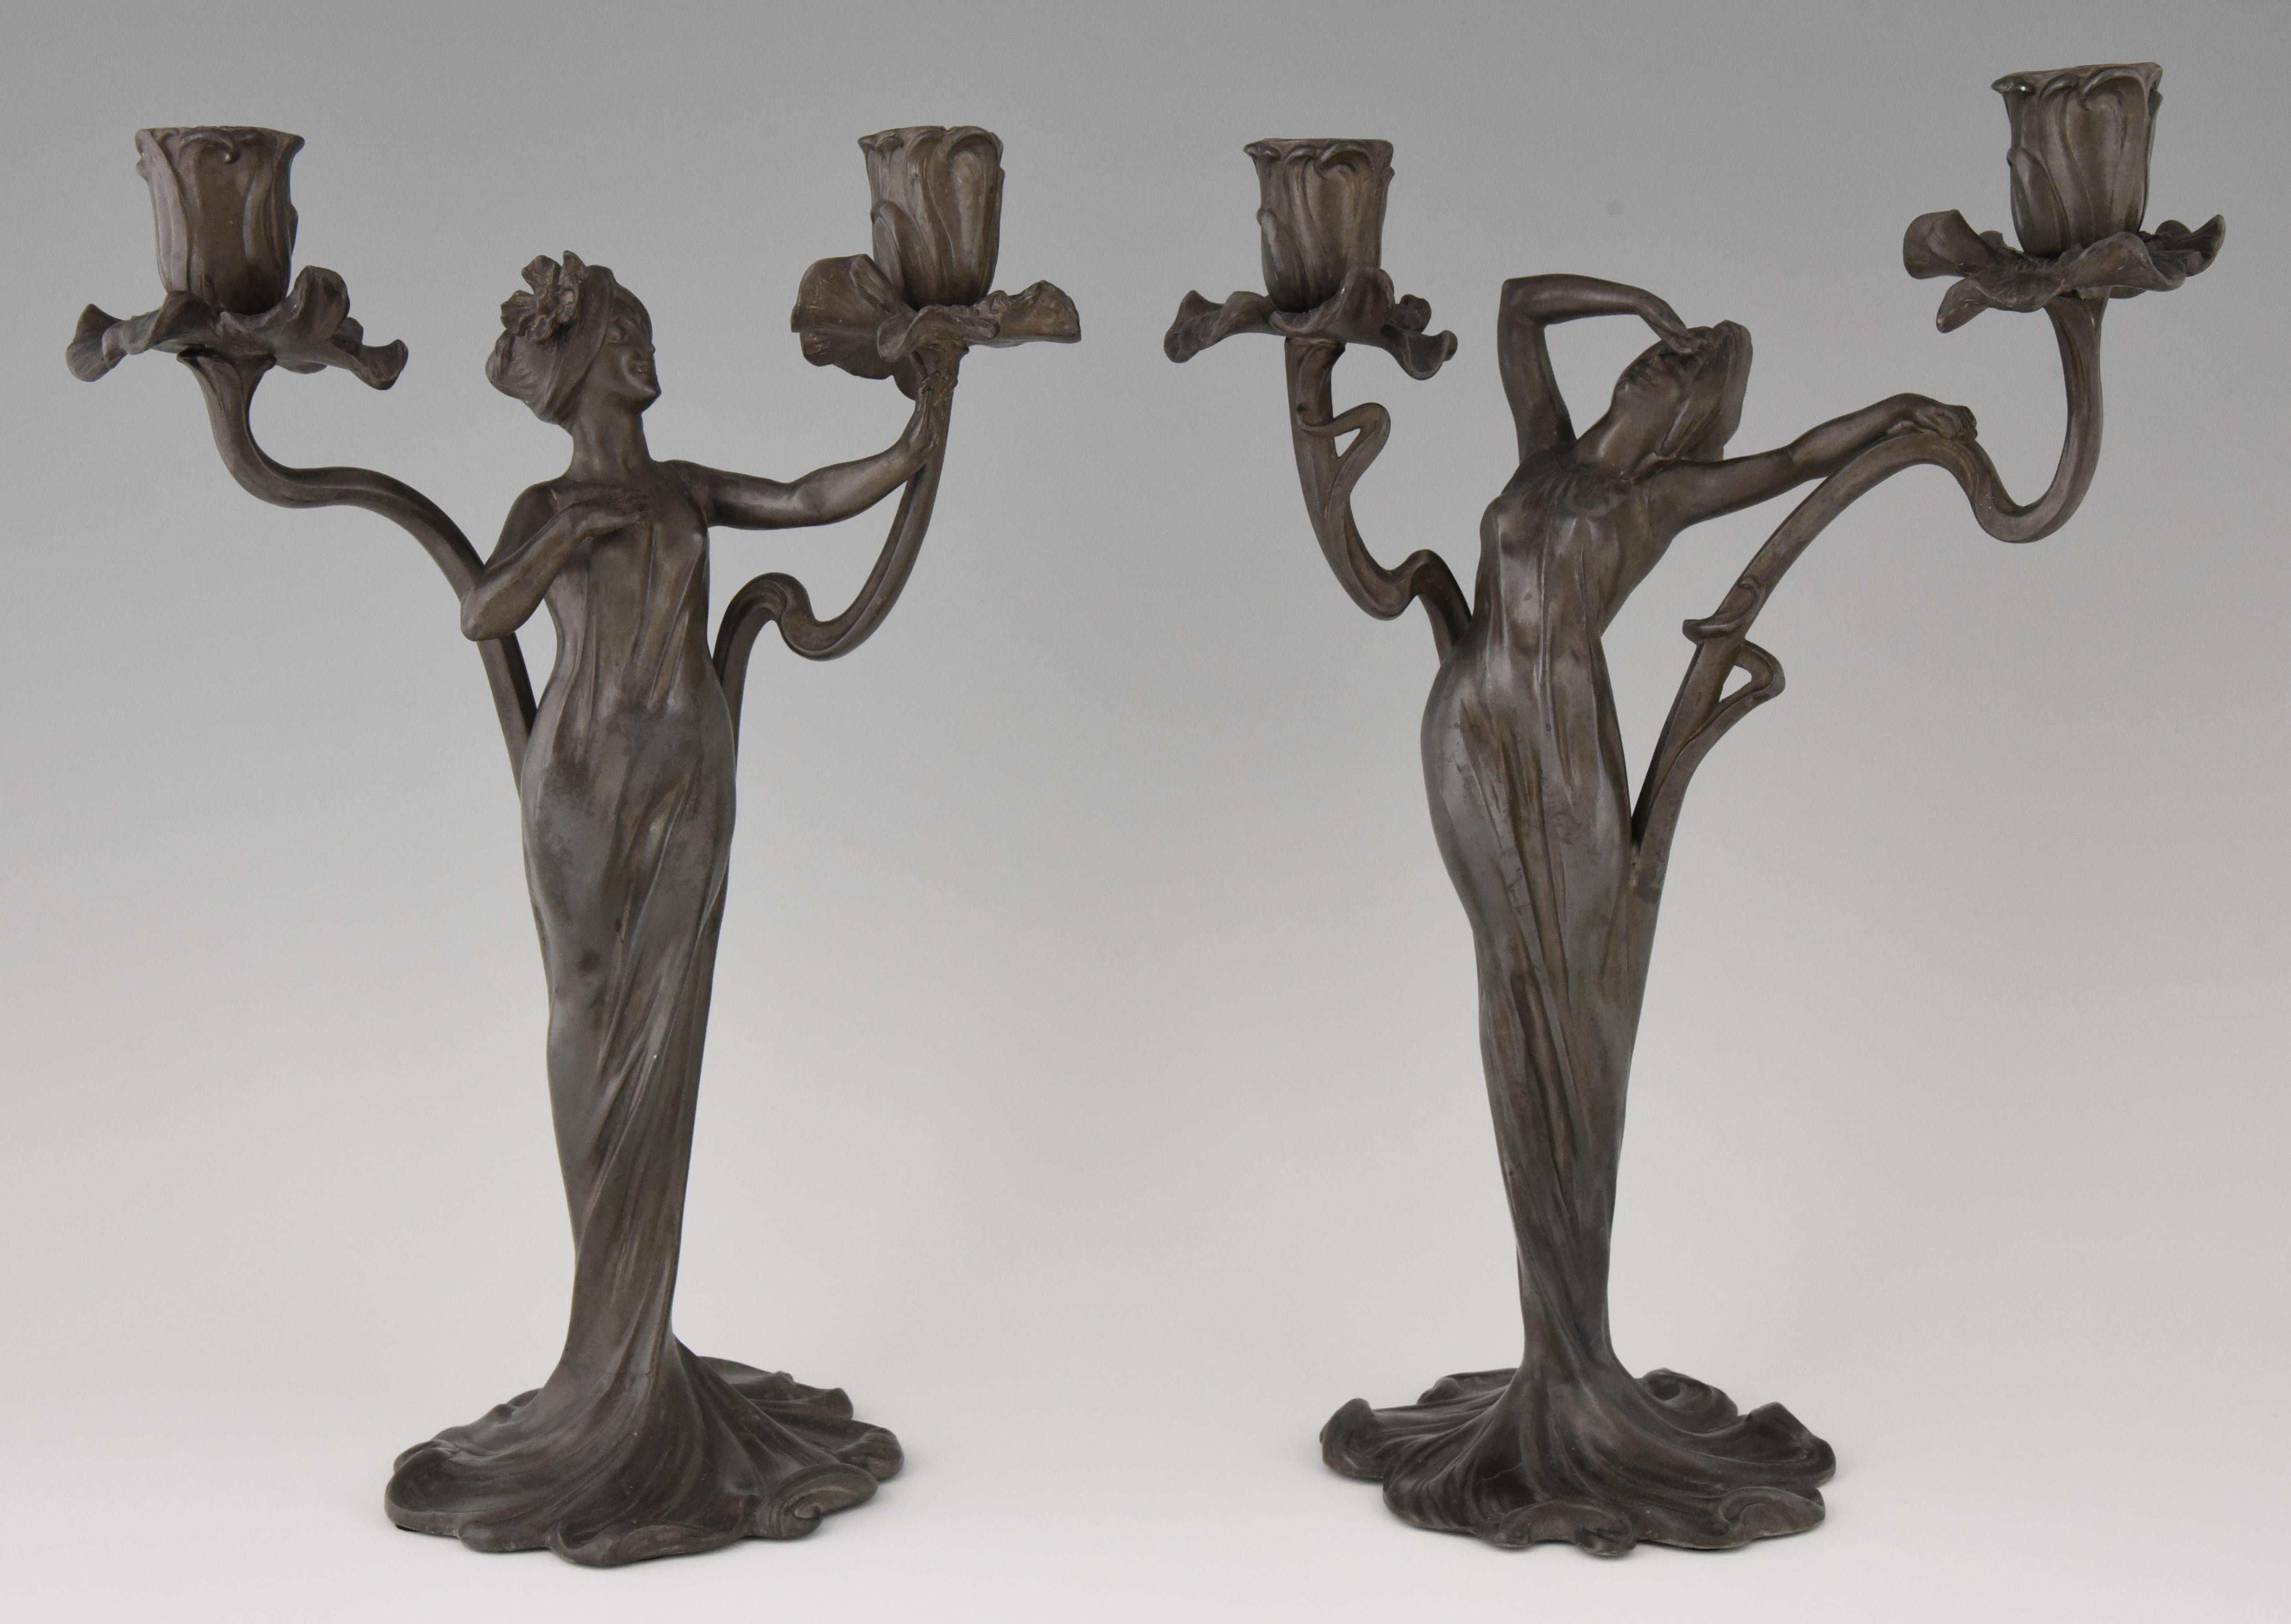 Elegant pair of Art Nouveau pewter candelabra decorated with ladies and flowers by the French artist Claude Bonnefond, France, 1900.
Weight: 3.3 kg.